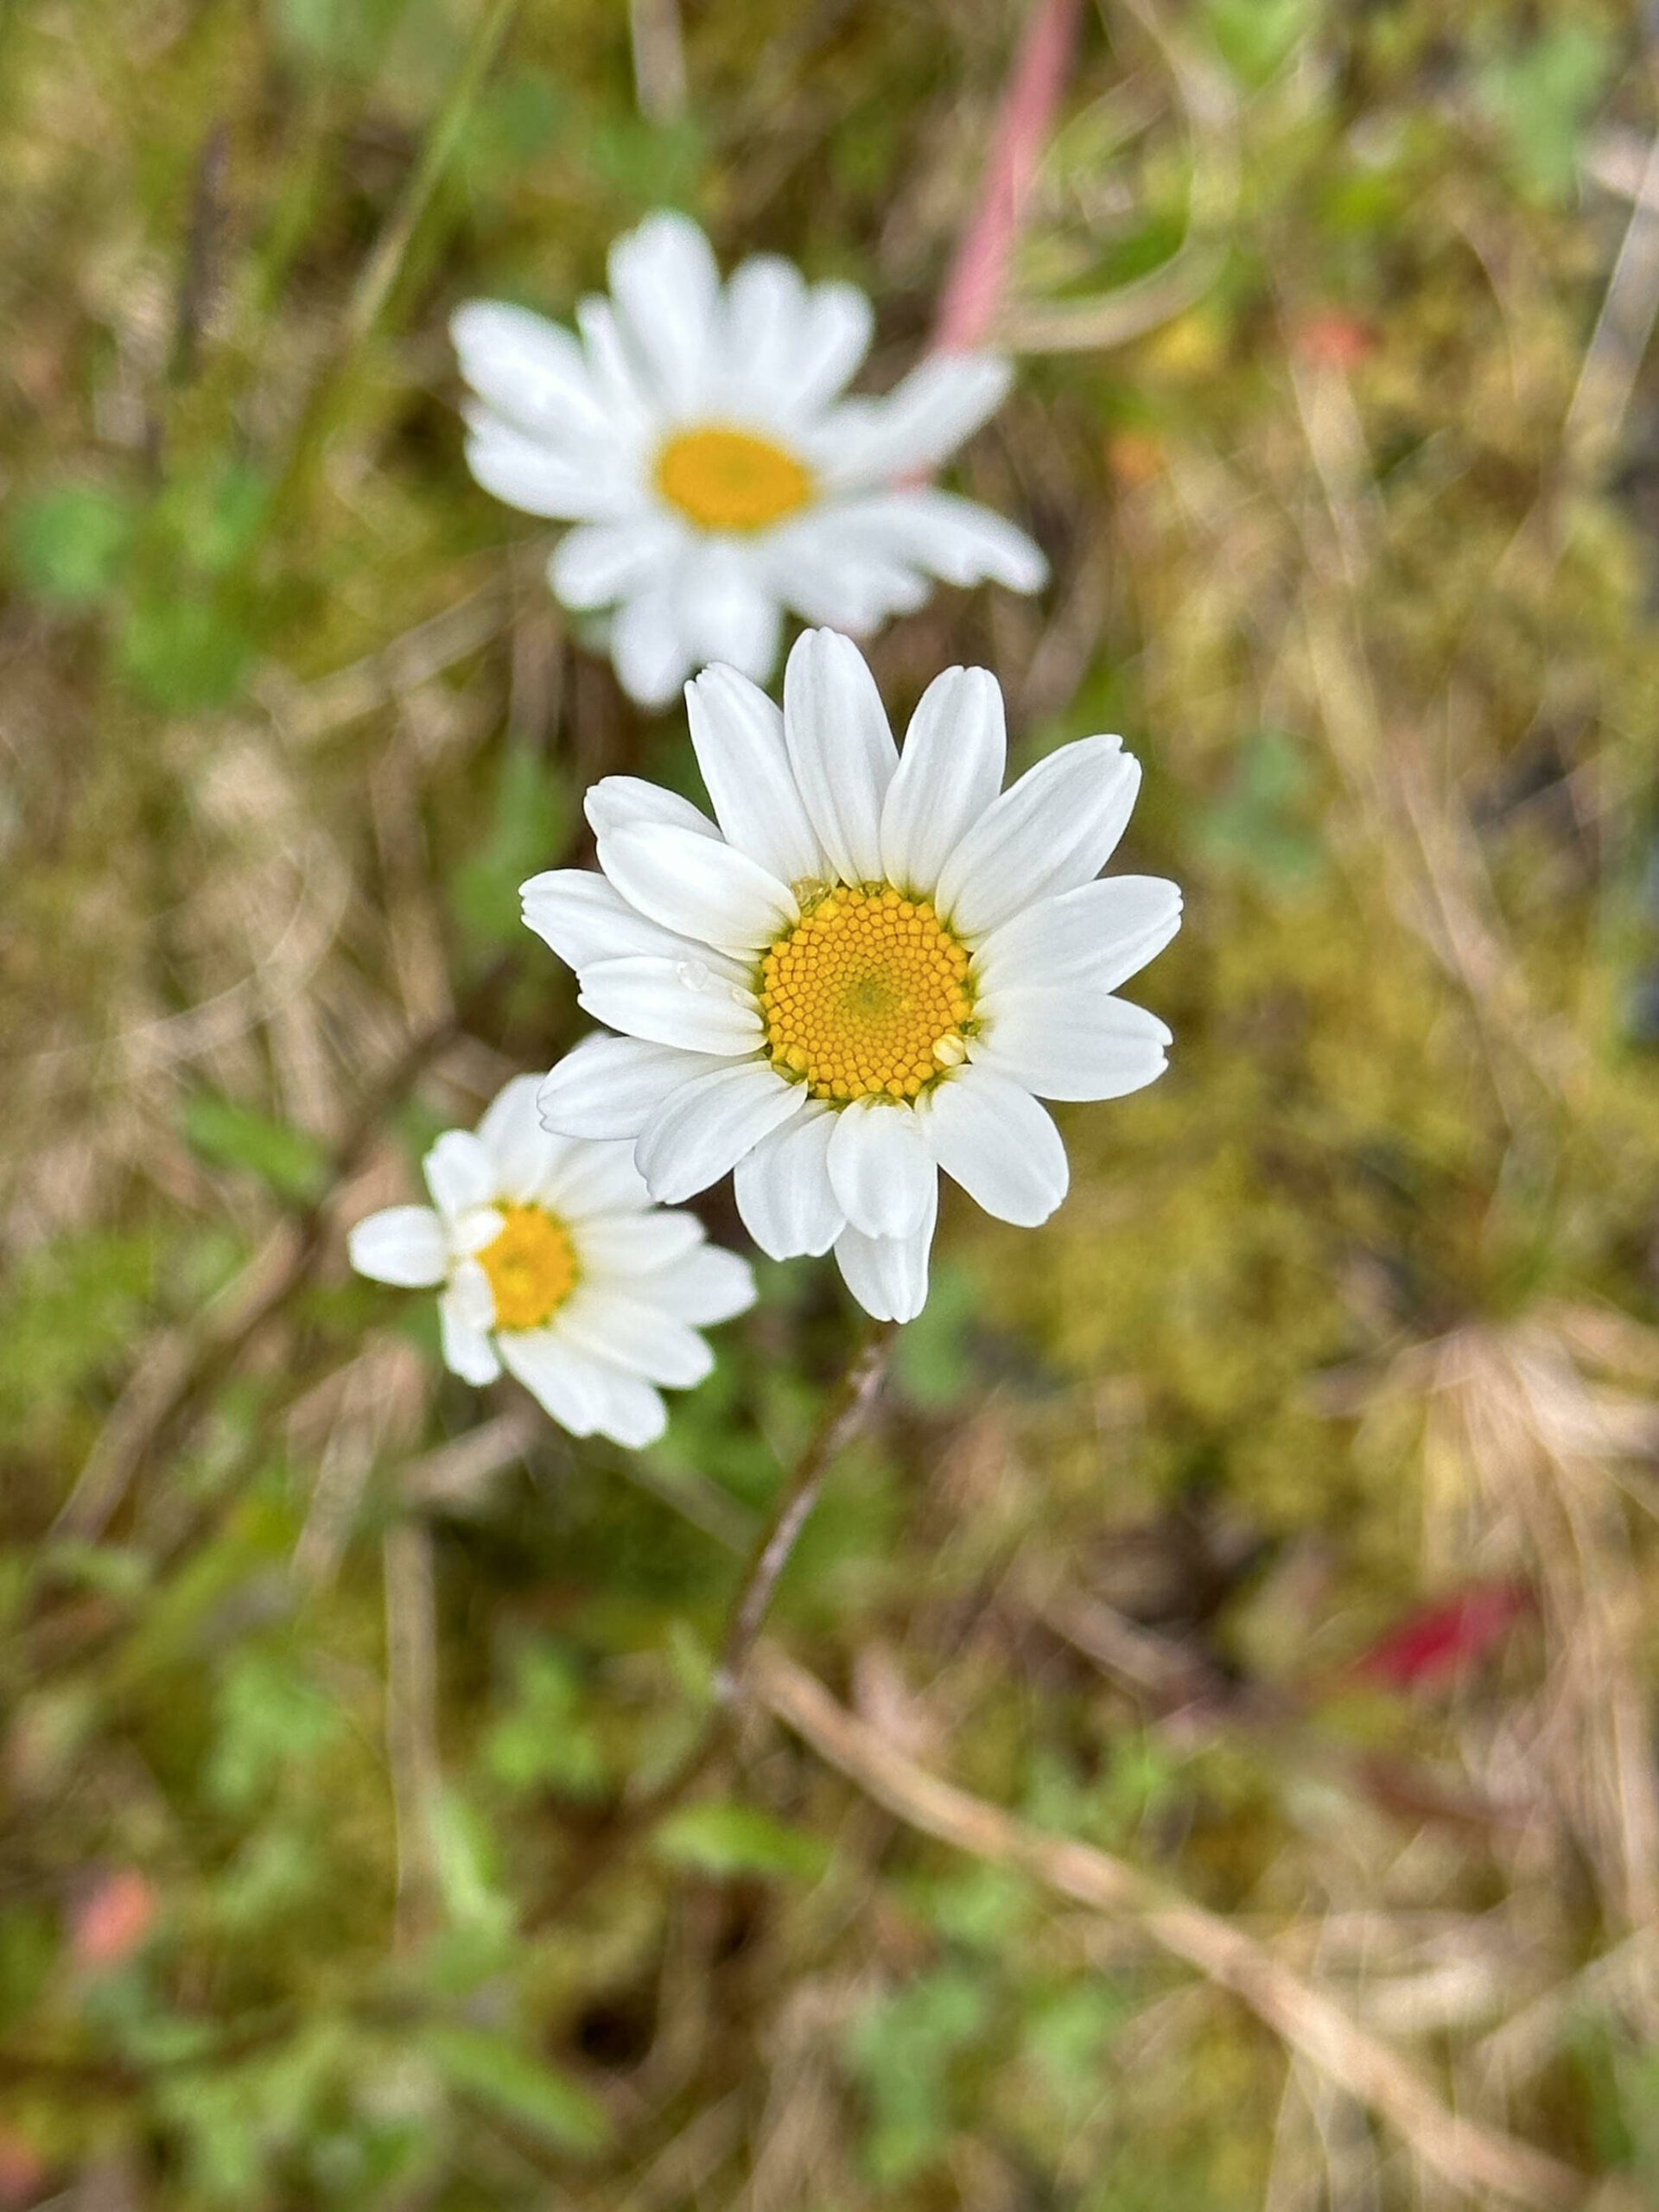 Courtesy Photo / Deana Barajas
Daisies starting to bloom near Twin Lakes on Monday, June 5.